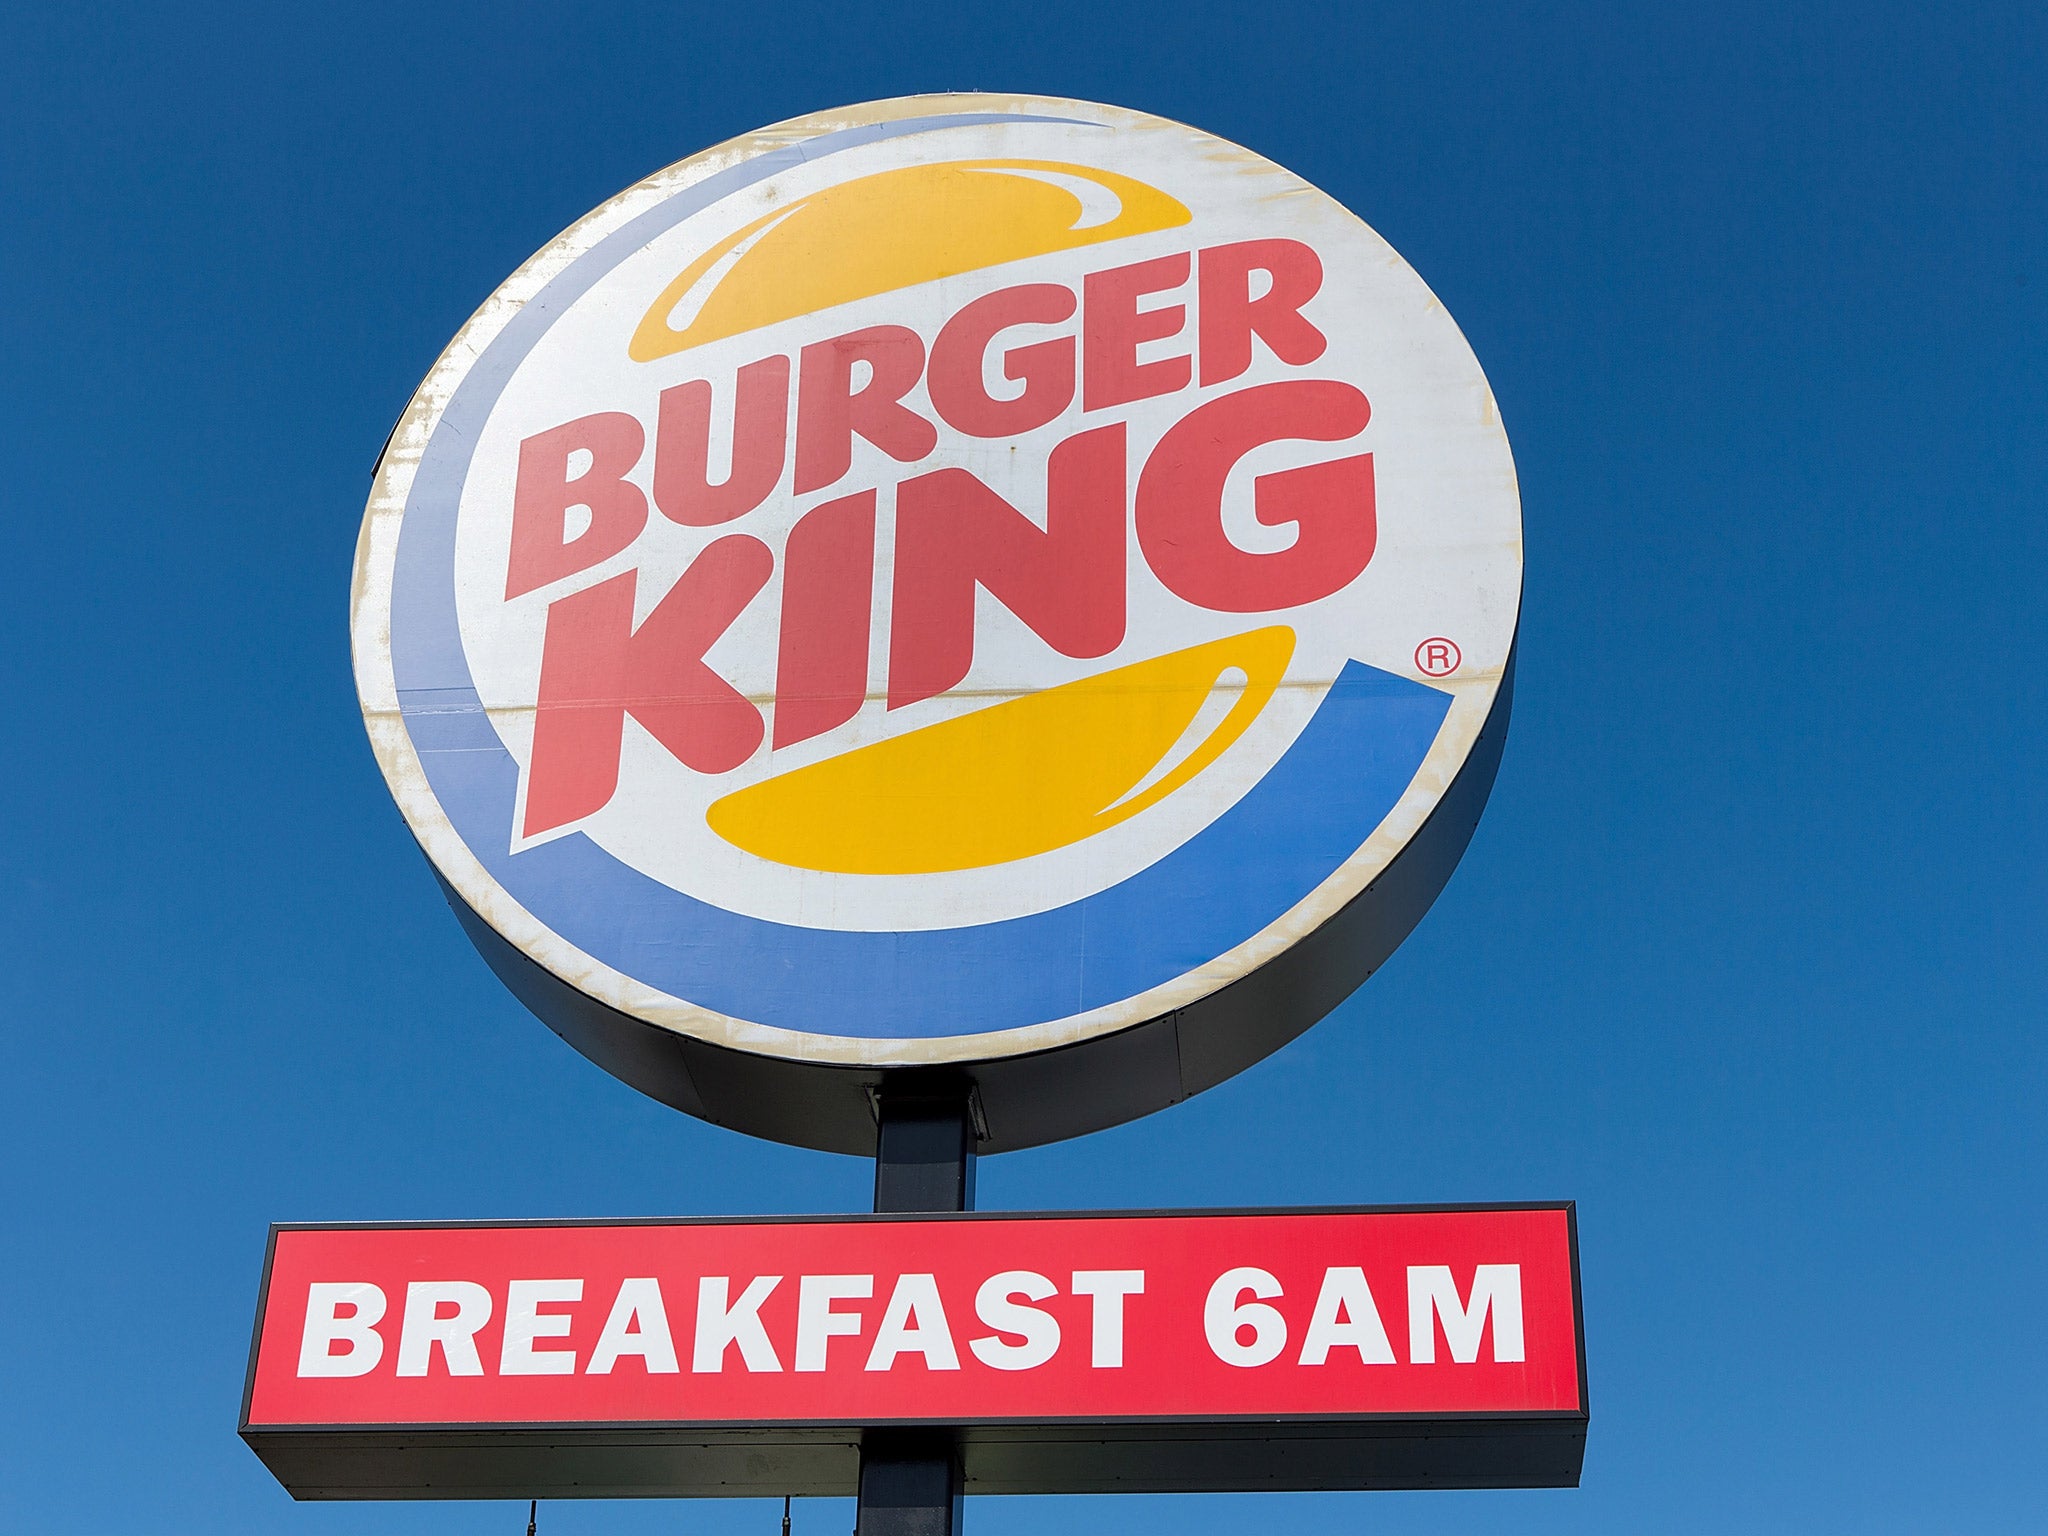 The owner of Burger King said it intends to apply the new policy to all brands over time